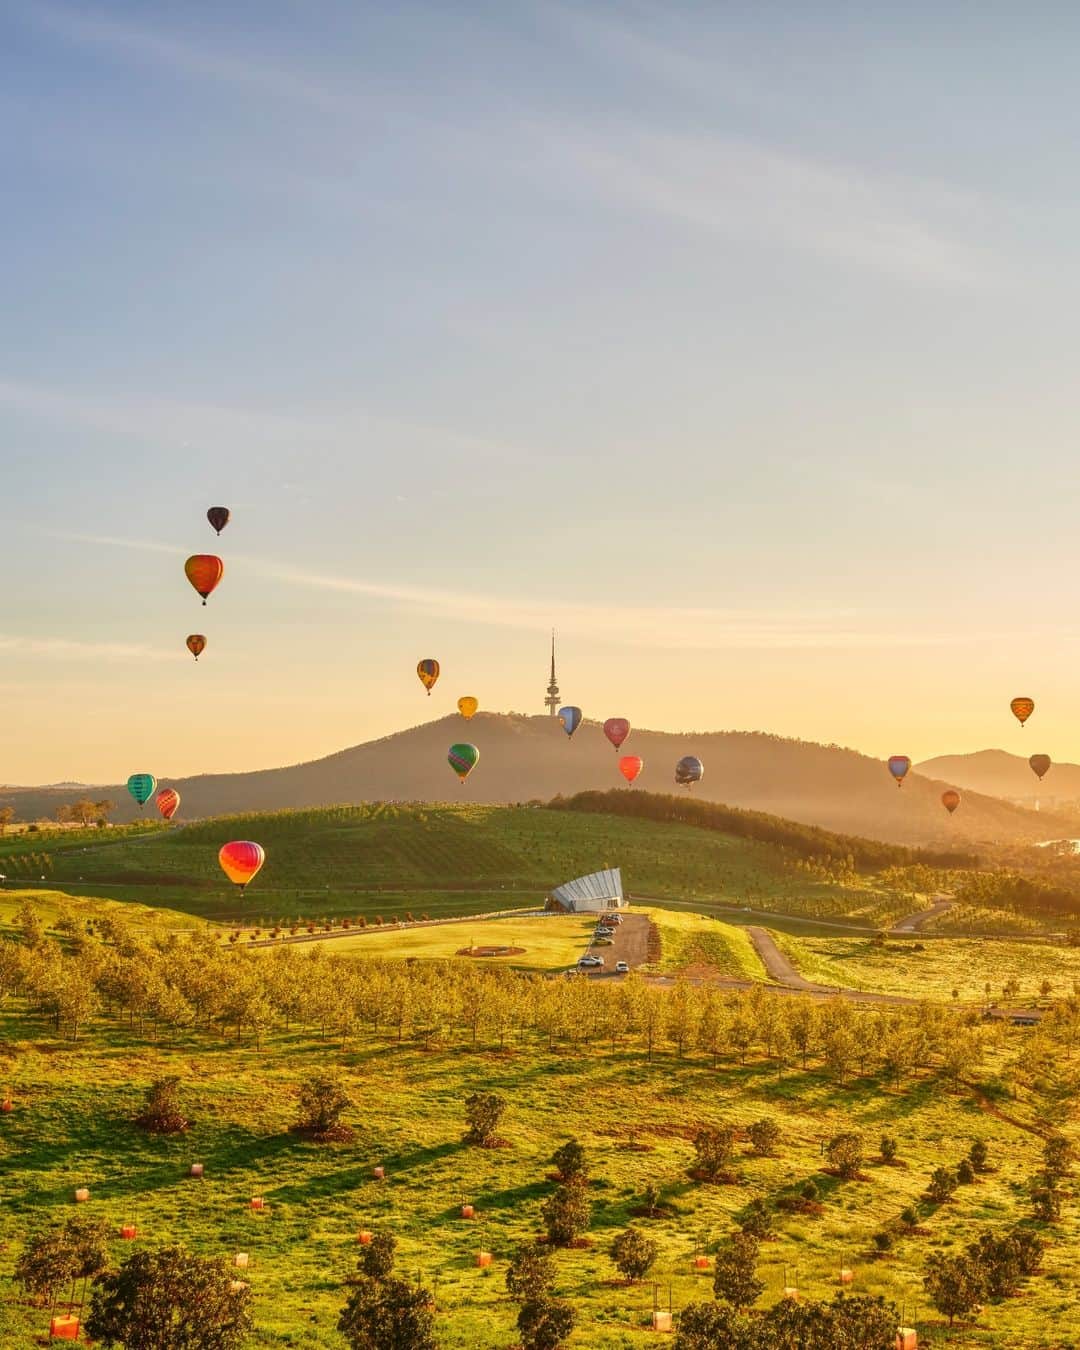 Australiaのインスタグラム：「Early bird gets the views on Ngunnawal Country 🍃🤩 #Australia's capital, @visitcanberra, is the perfect location for a city break - boasting a thriving cultural hub, delicious dining scene, and some of the best museums and galleries in the country! We suggest adding a hot air balloon flight with @balloonaloftcanberra to your itinerary to soak in dazzling views like this☝️Hot tip: visit in March to witness the #CanberraBalloonSpectacular, when dozens of hot air balloons take to the skies above #LakeBurleyGriffin, it's quite the sight to see!   #SeeAustralia #ComeAndSayGday #VisitCanberra #WeAreCBR  ID: multiple hot air balloons rise towards the sky at first light. Green rolling fields are laid out below them. In the distance, a tower can be seen on top of a hill.」